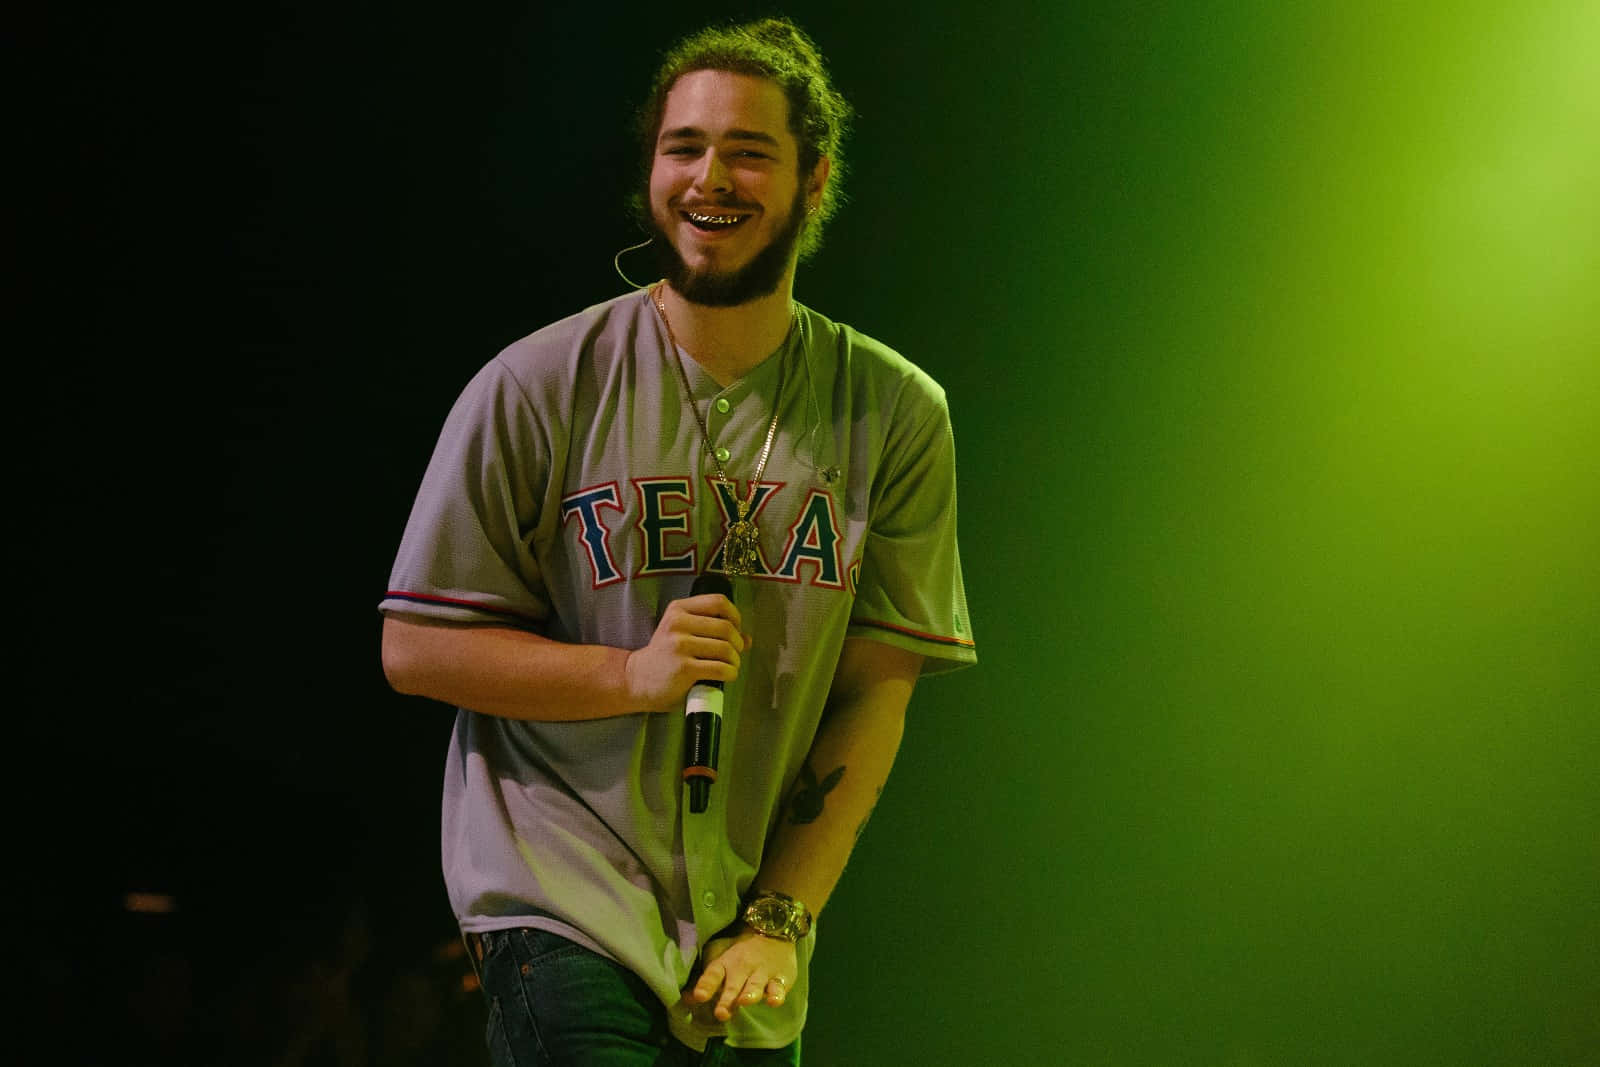 Post Malone performing live